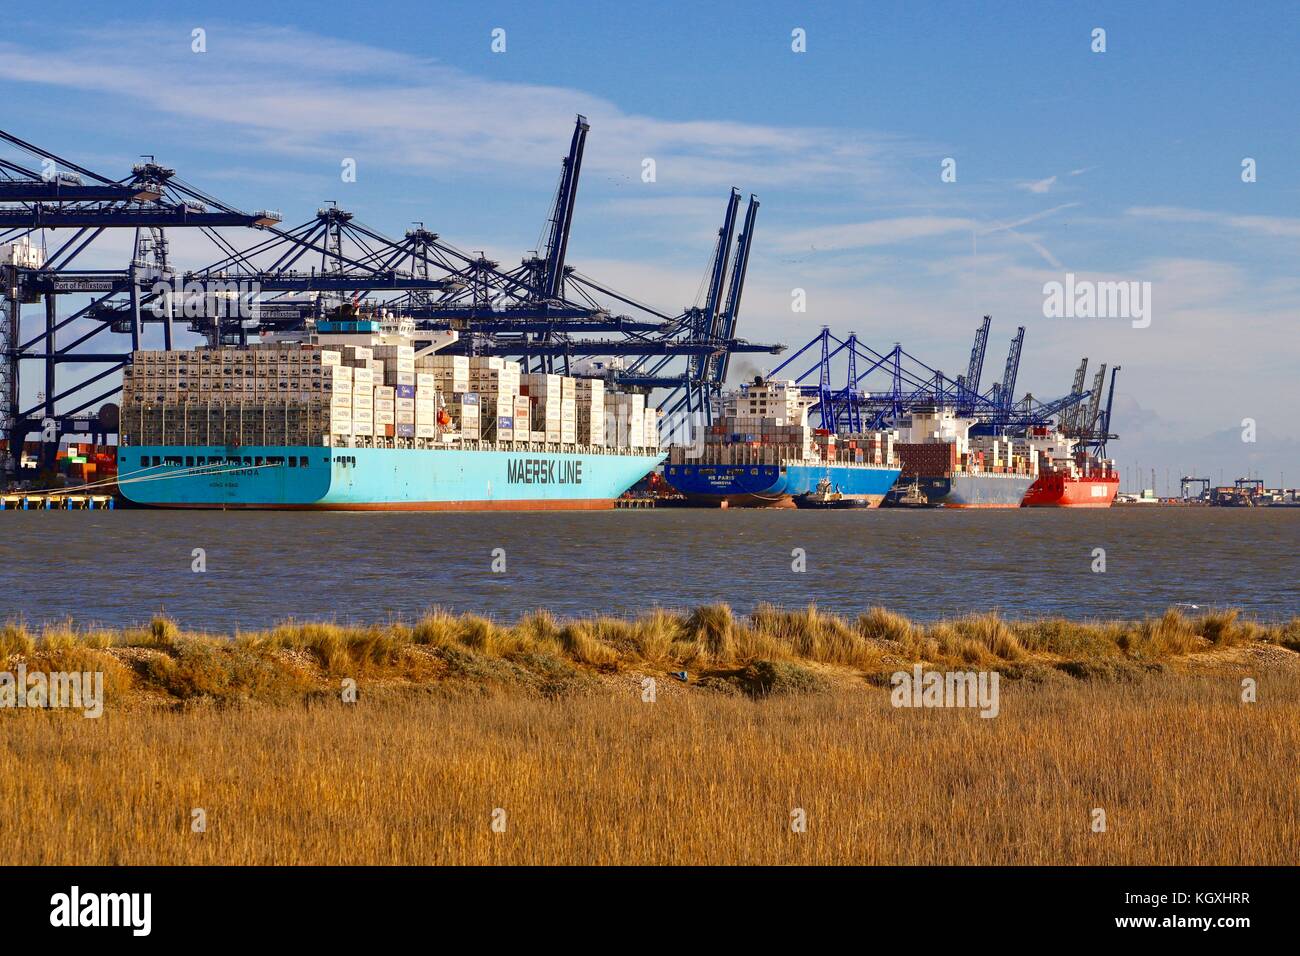 Working cranes at the Port of Felixstowe waiting for the next container ship to load or unload. Seen from across the River Orwell at Shotley Gate. Stock Photo